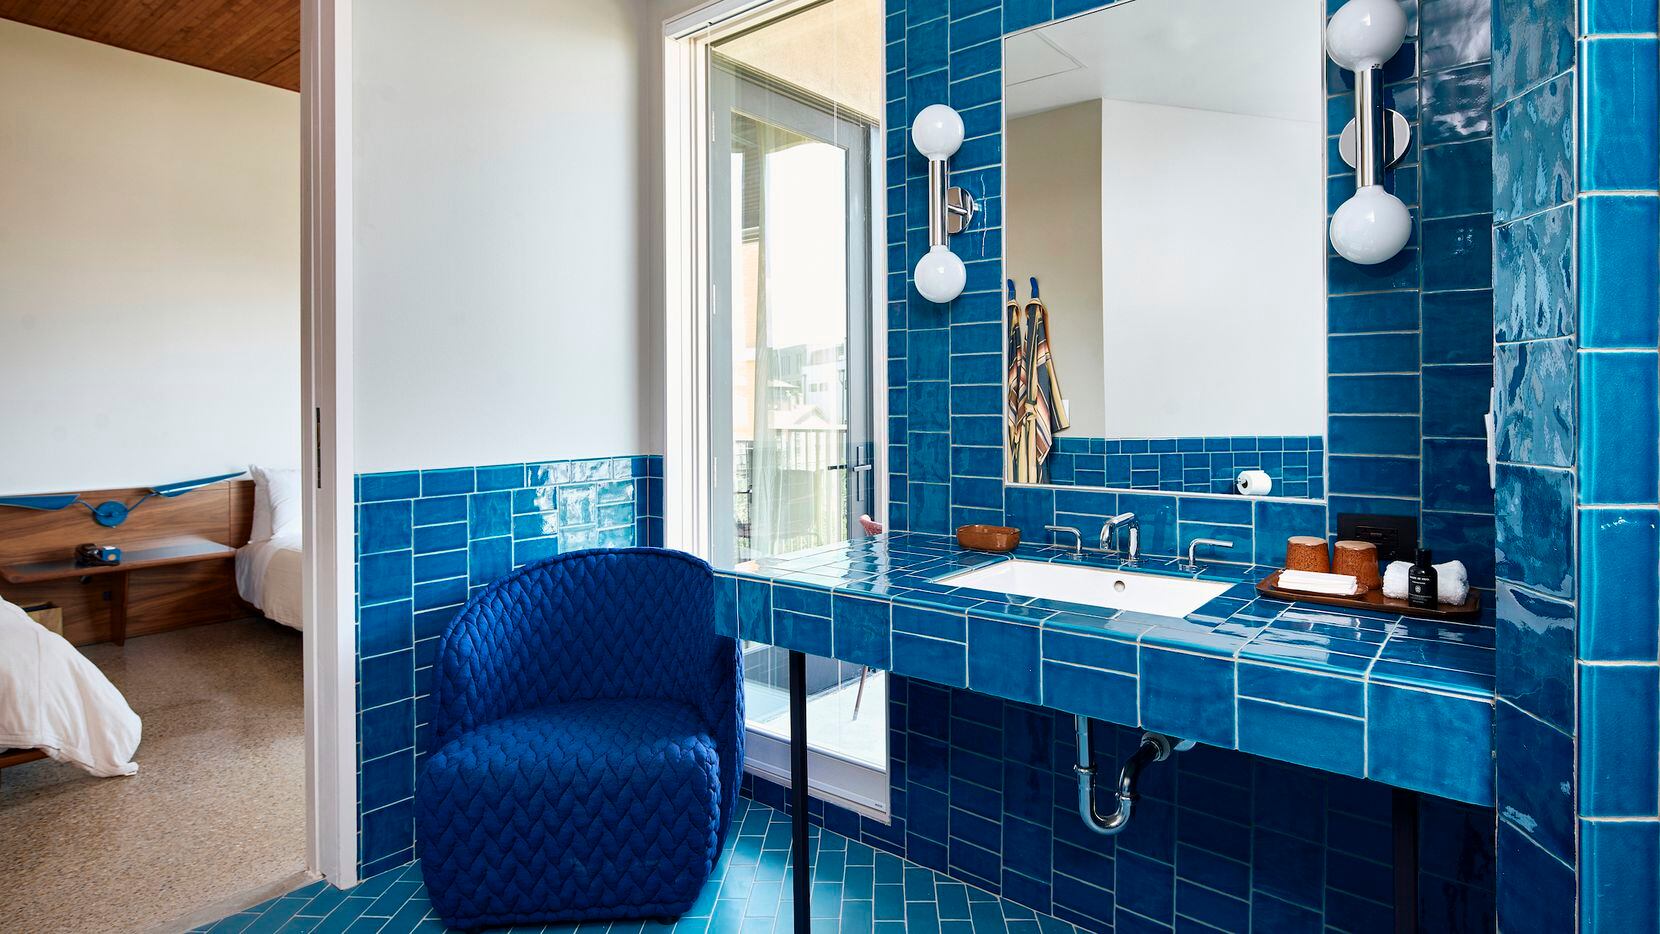 Hotel Magdalena in Austin has bright rooms featuring red, green, blue and yellow Spanish tiles.